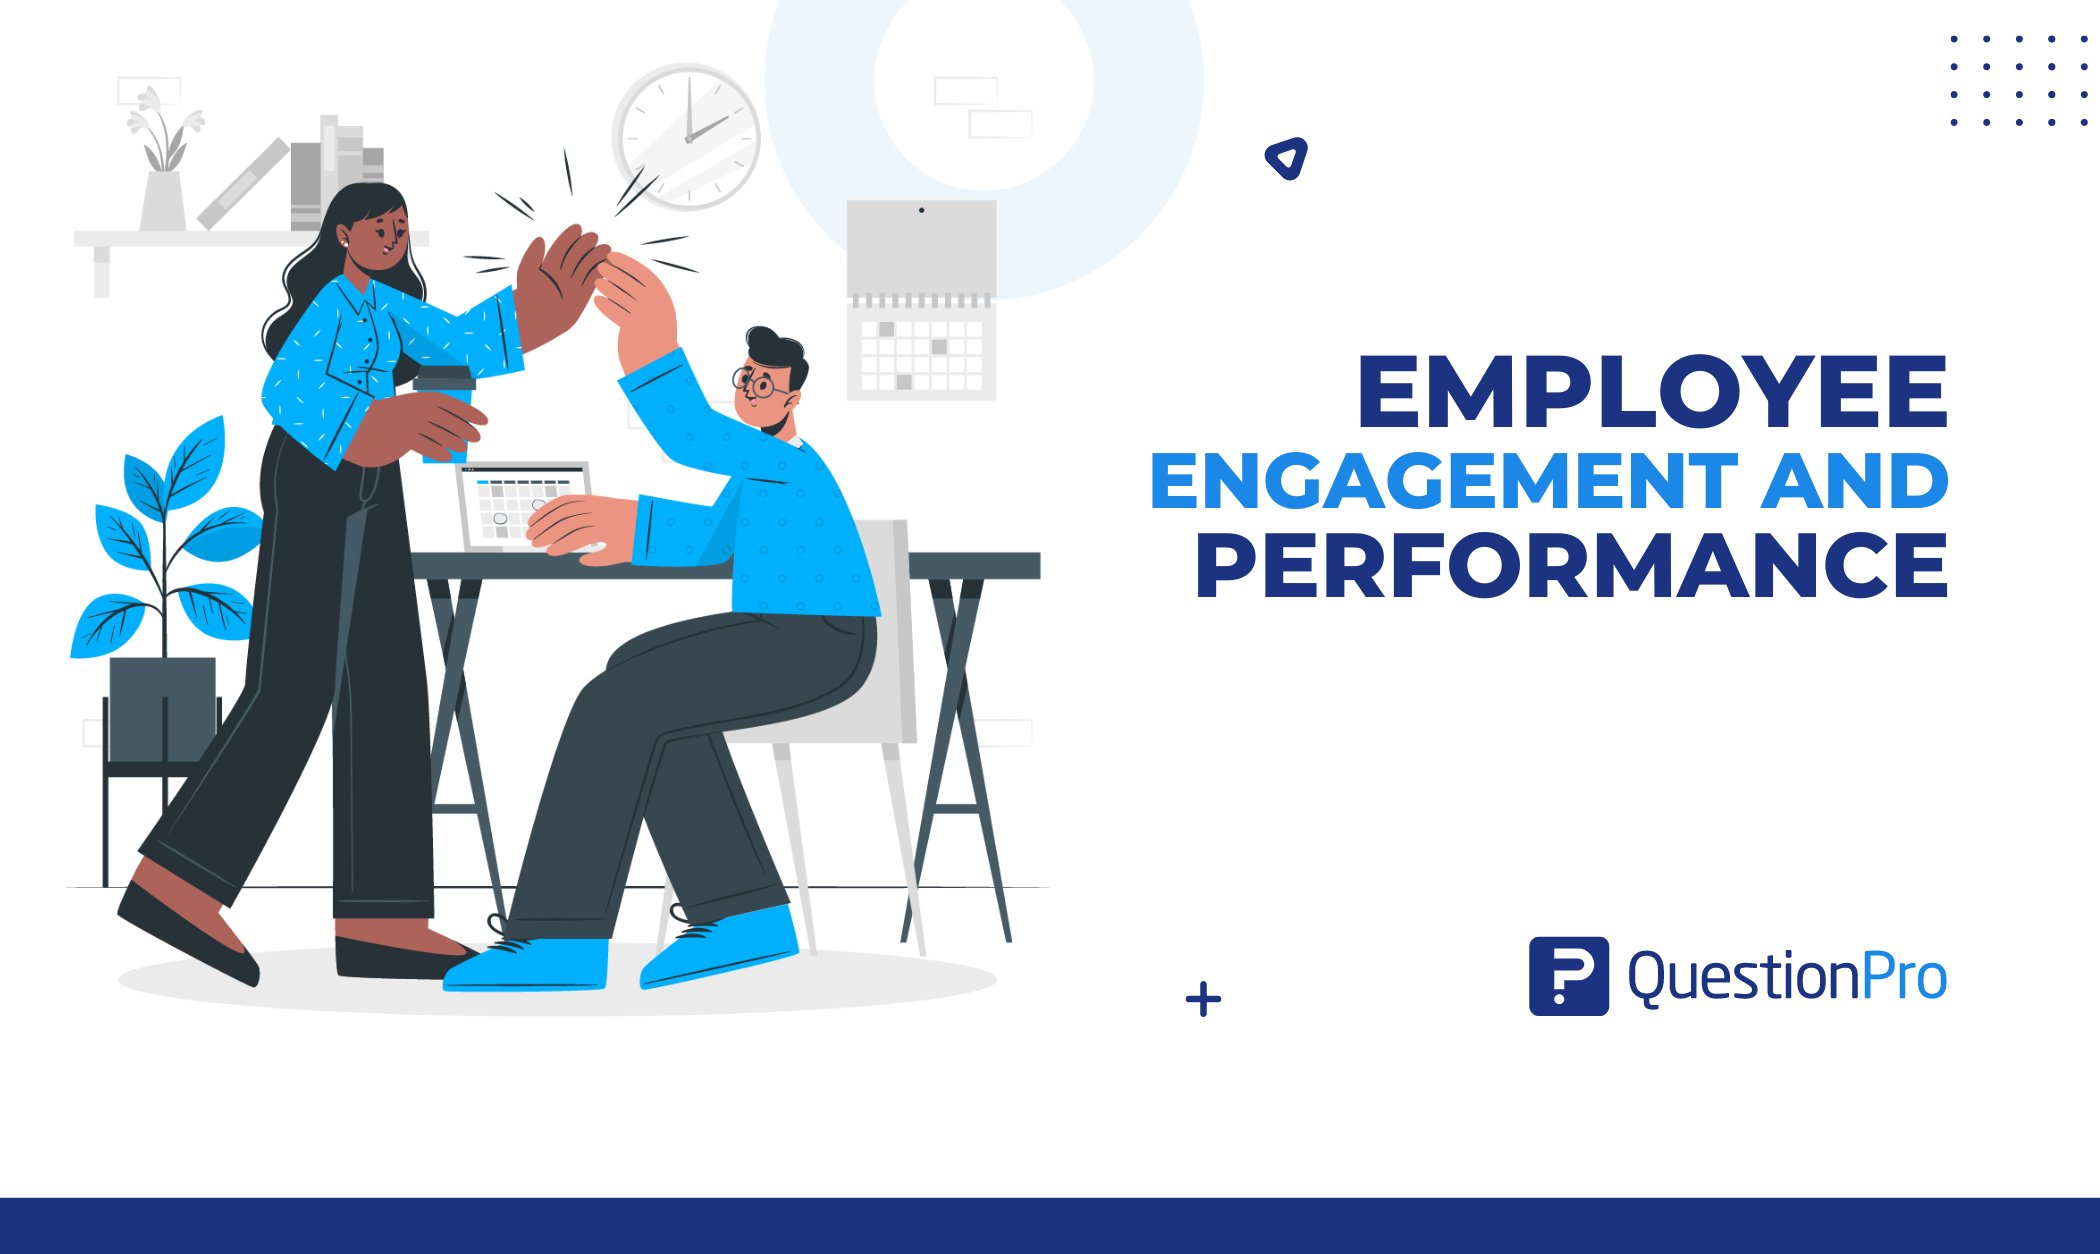 Employee engagement and performance: Is there a relation?